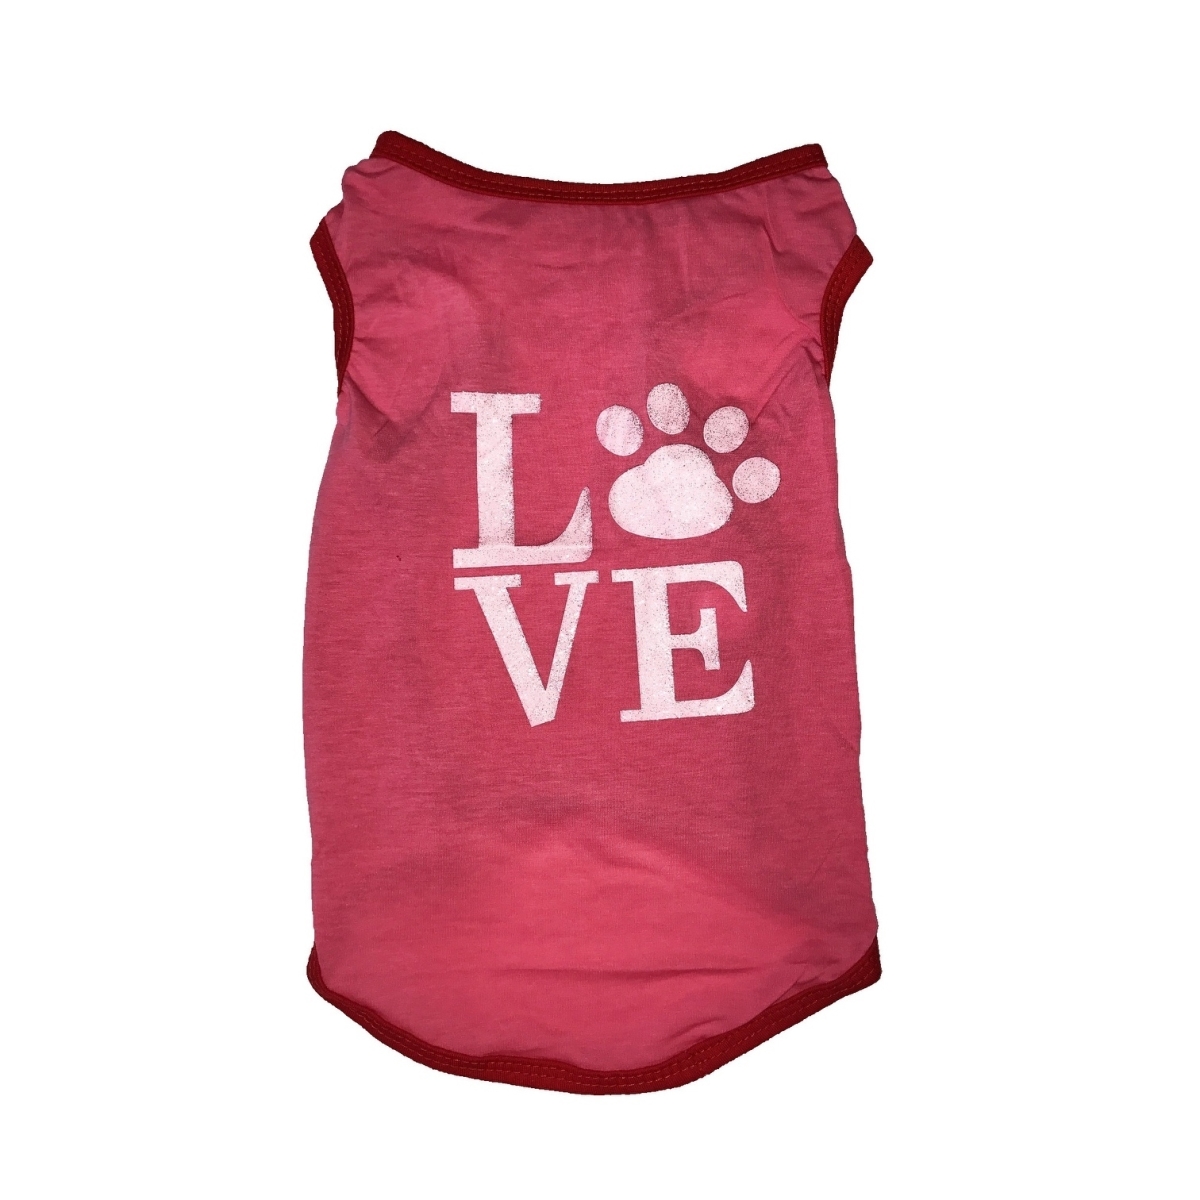 Dgpaw-xs Love Paw,pink- Extra Small